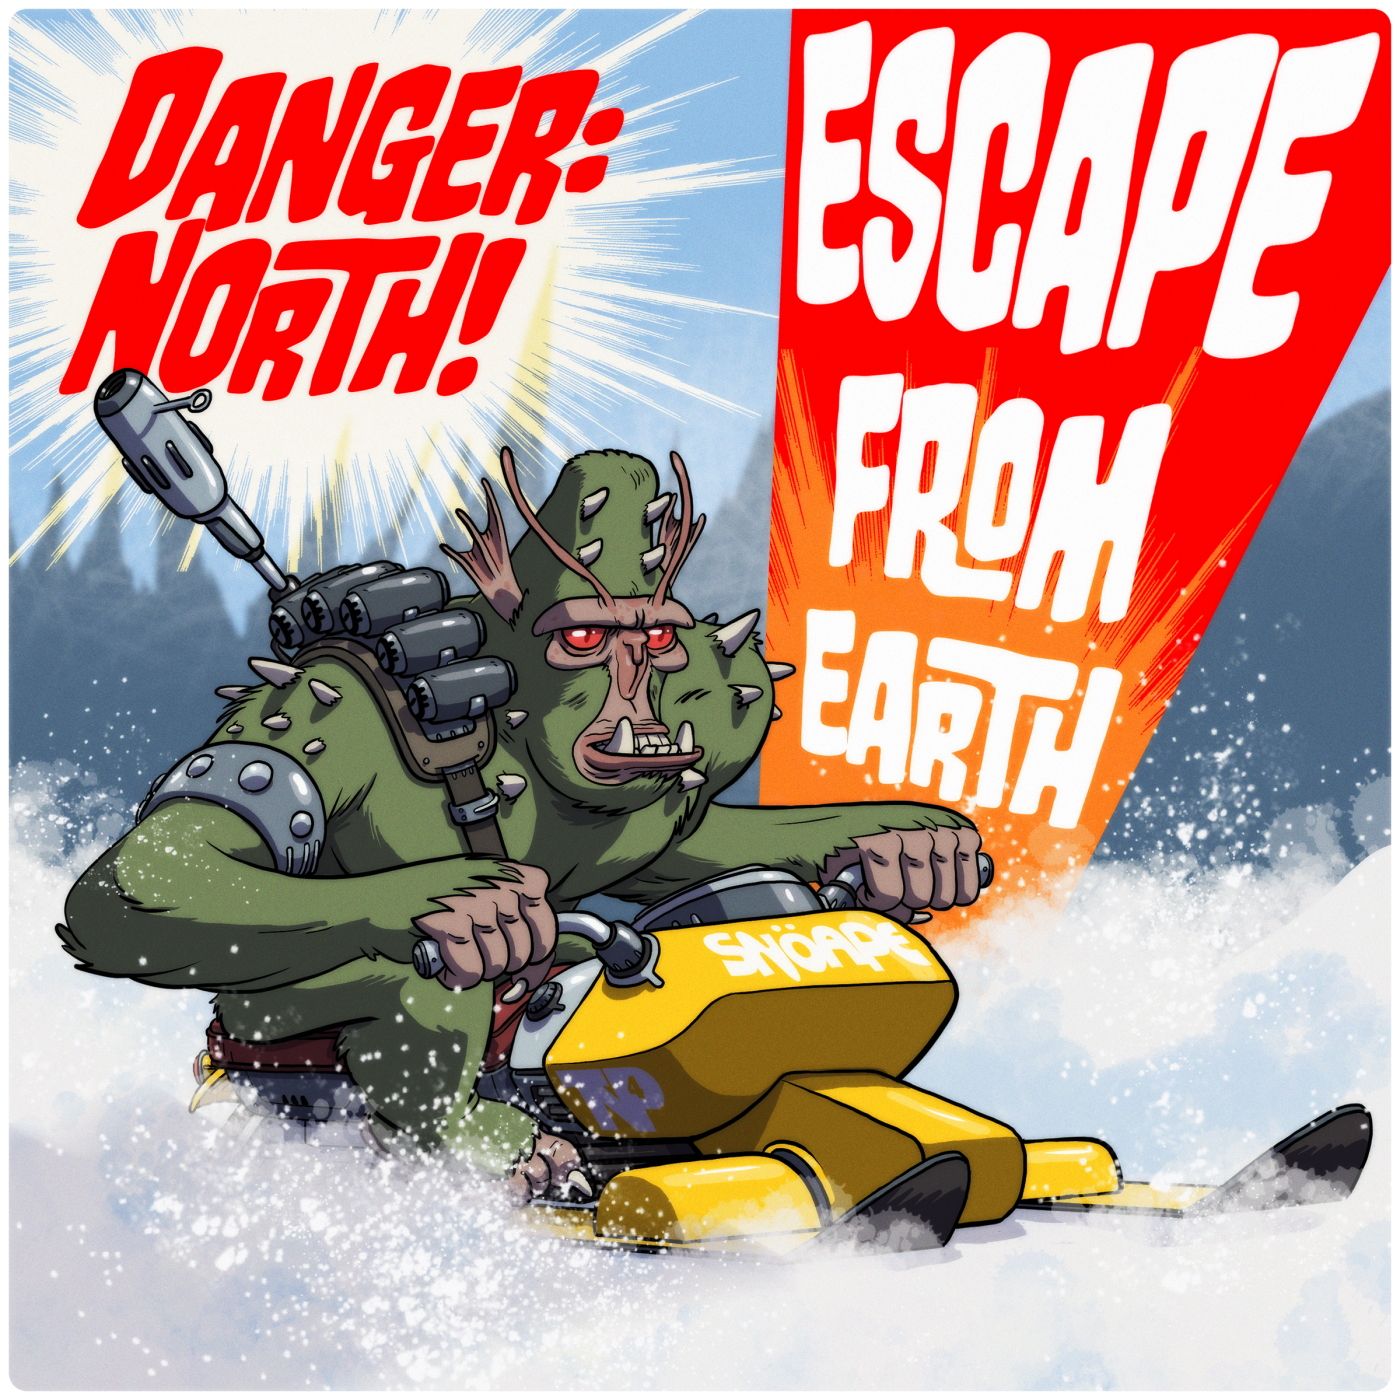 ’Danger: North! Escape from Earth’ preview